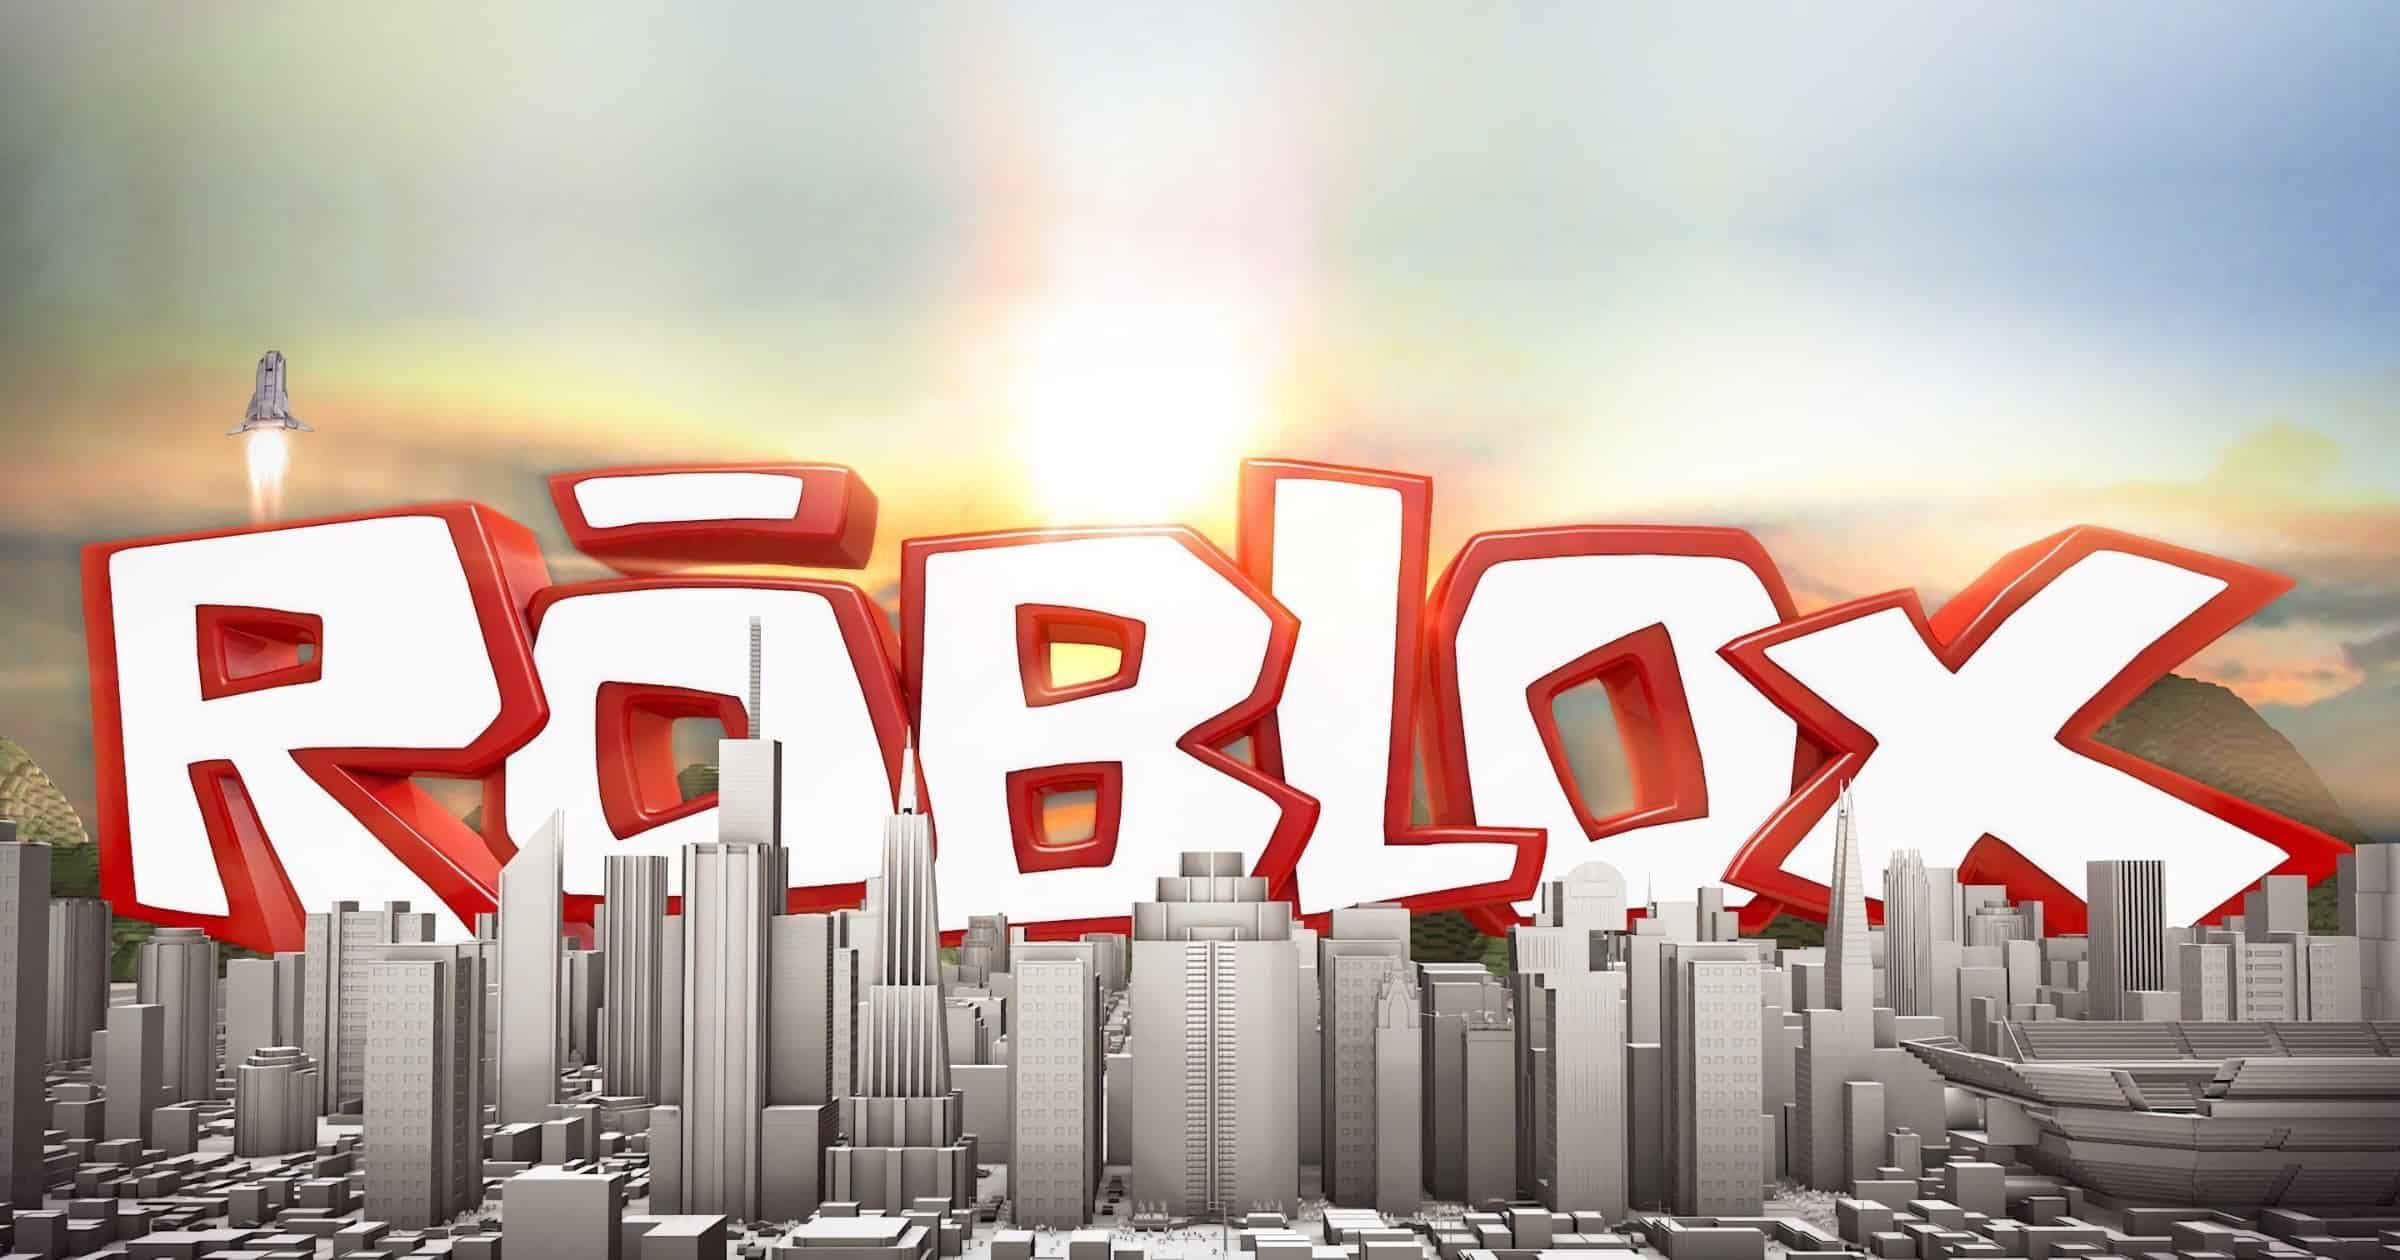 Here are 5 Essential Gaming Tips to Get Started in Roblox